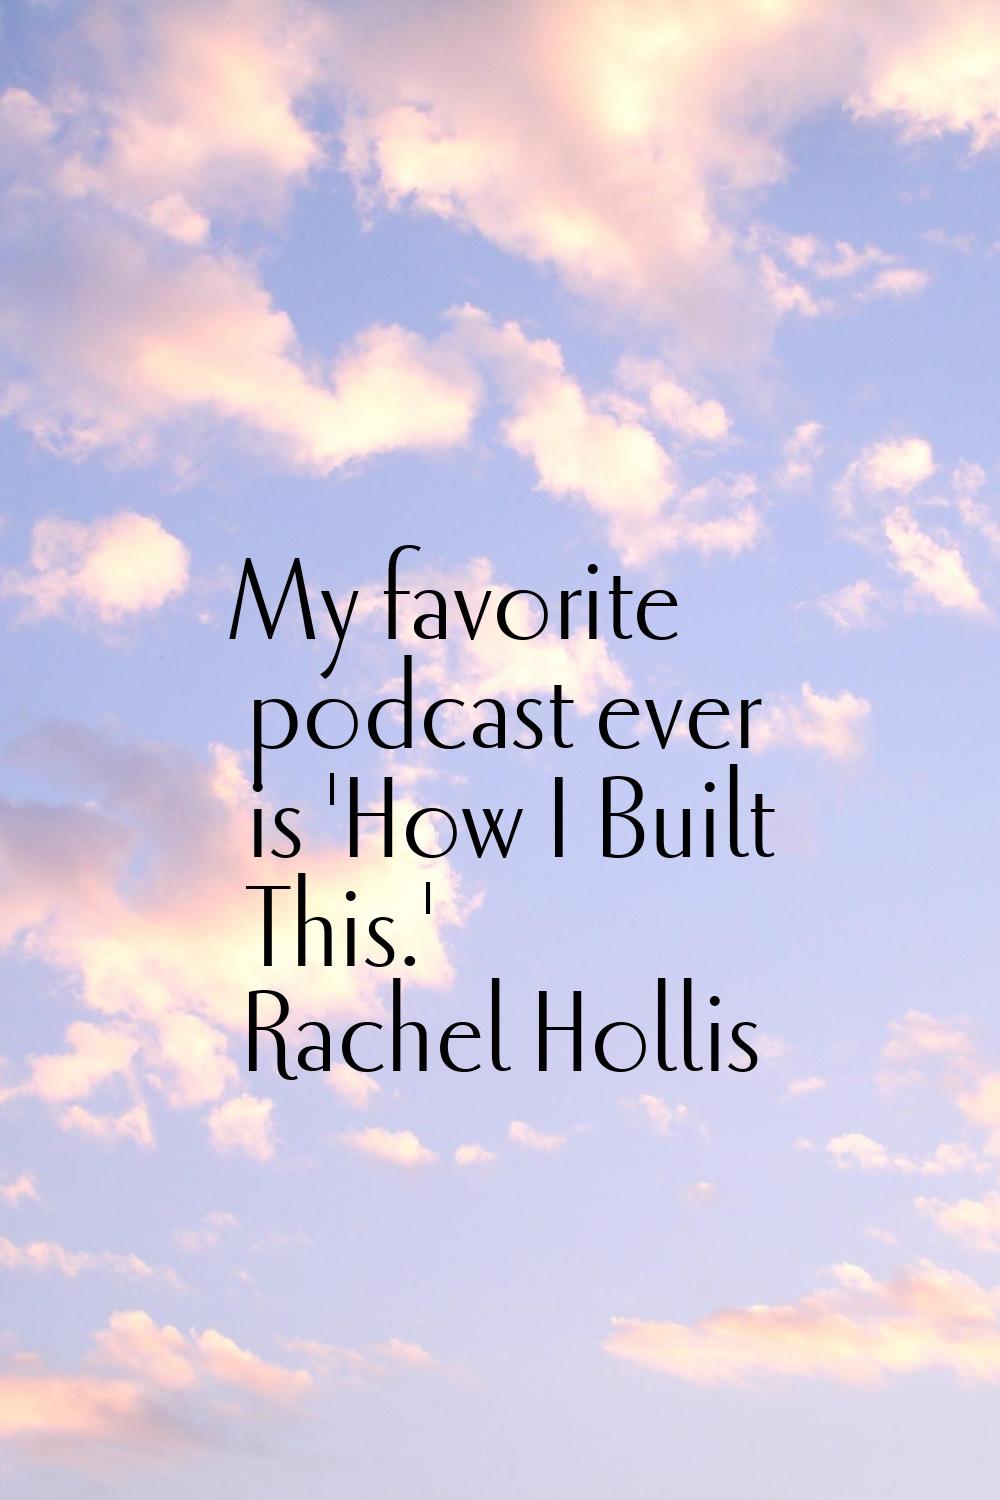 My favorite podcast ever is 'How I Built This.'